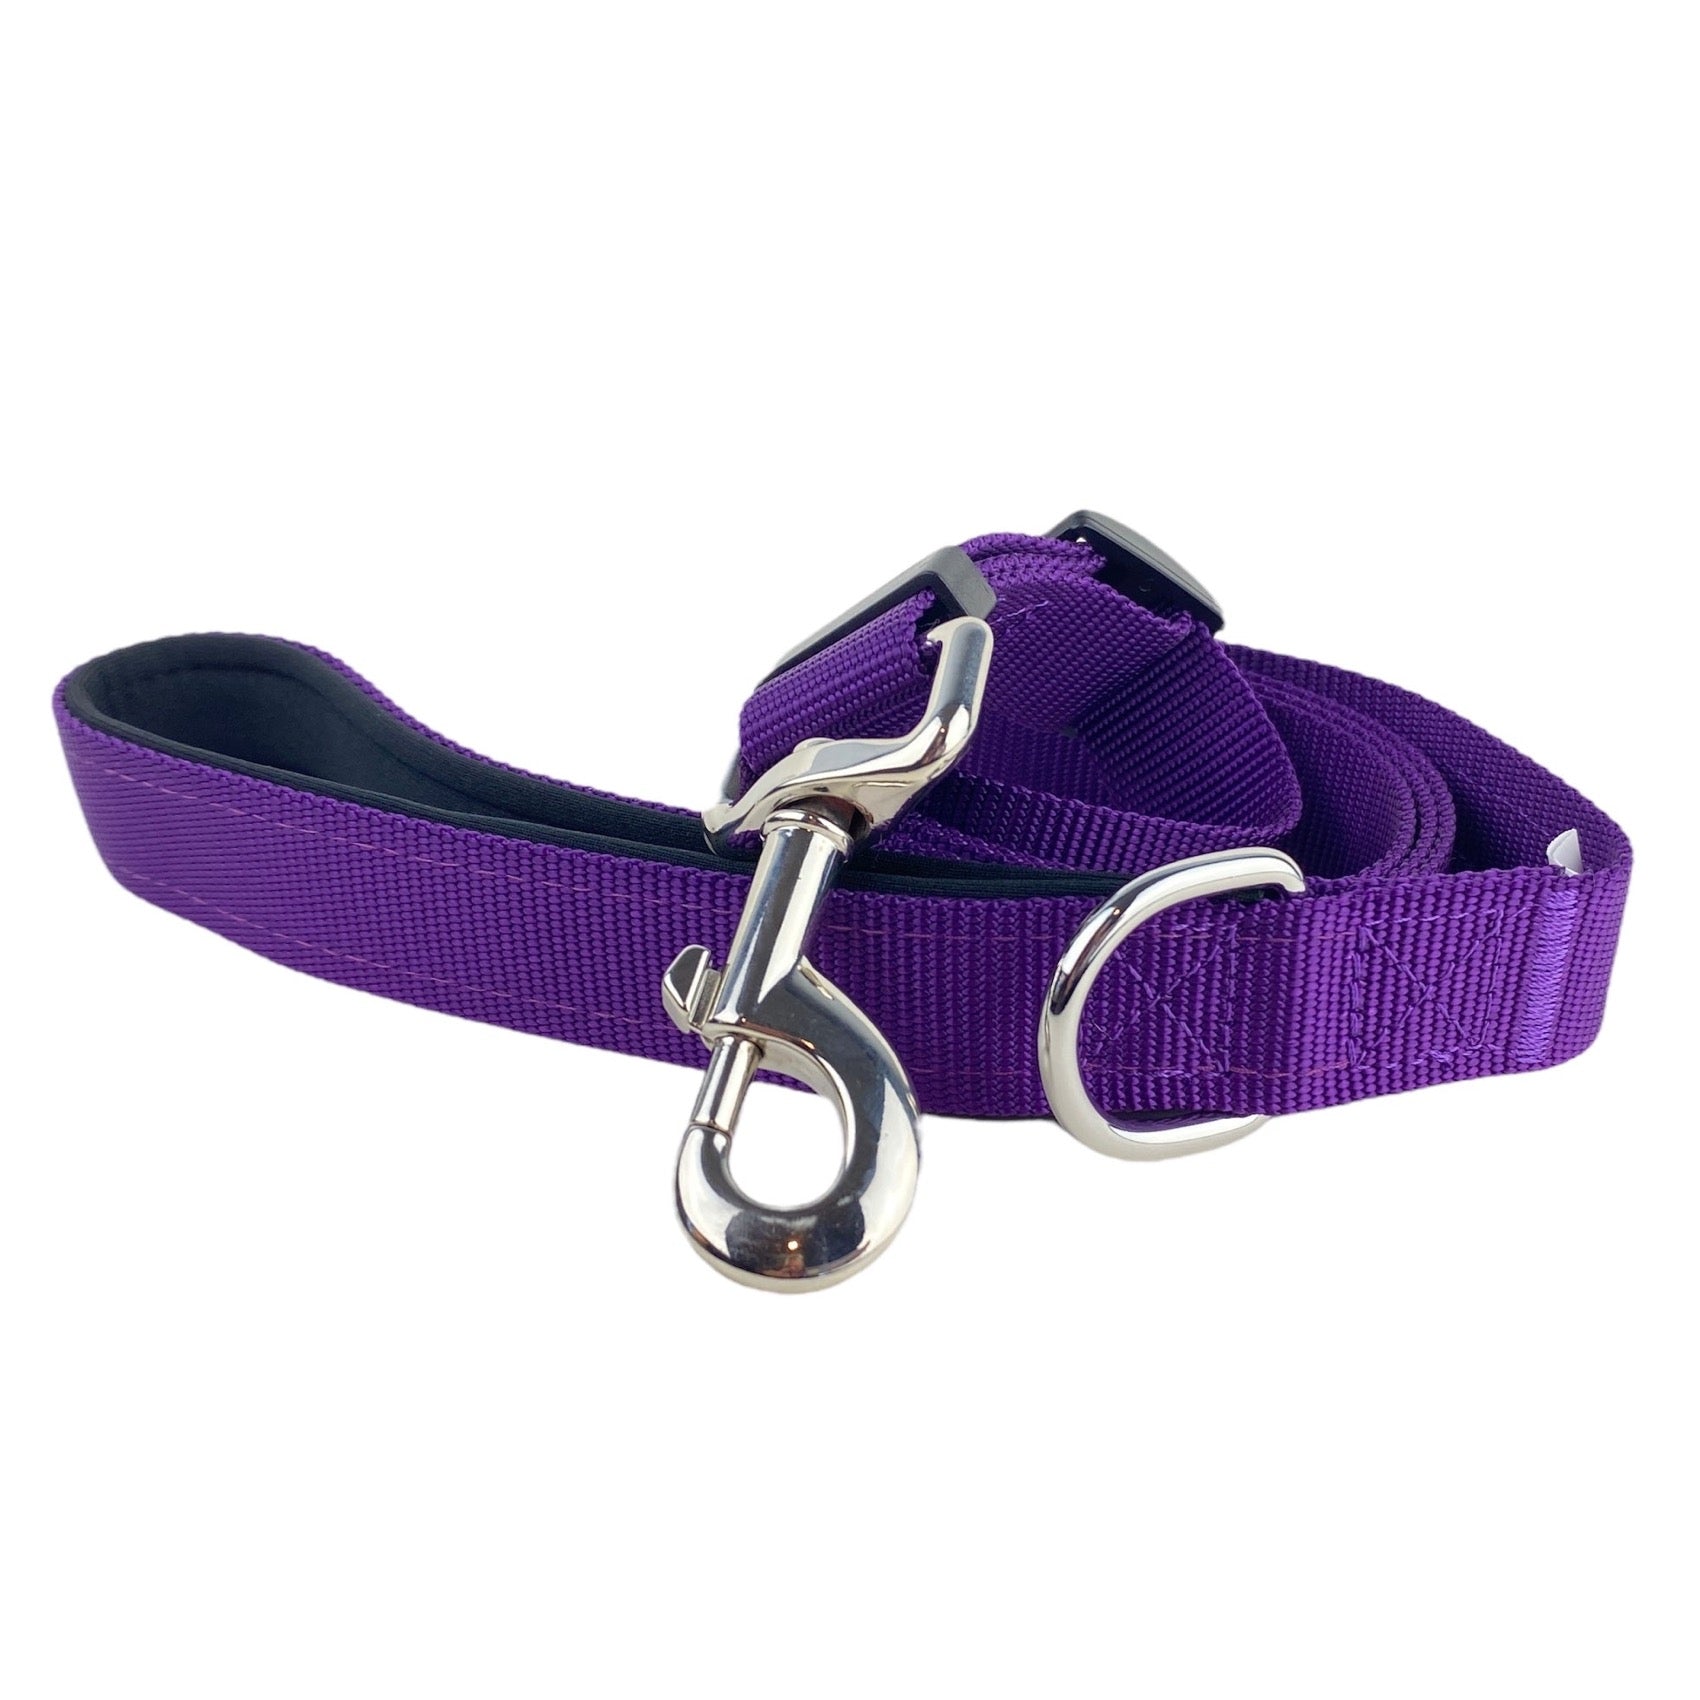 a photo of a purple padded handle adjustable leash from fearless pet on a white background